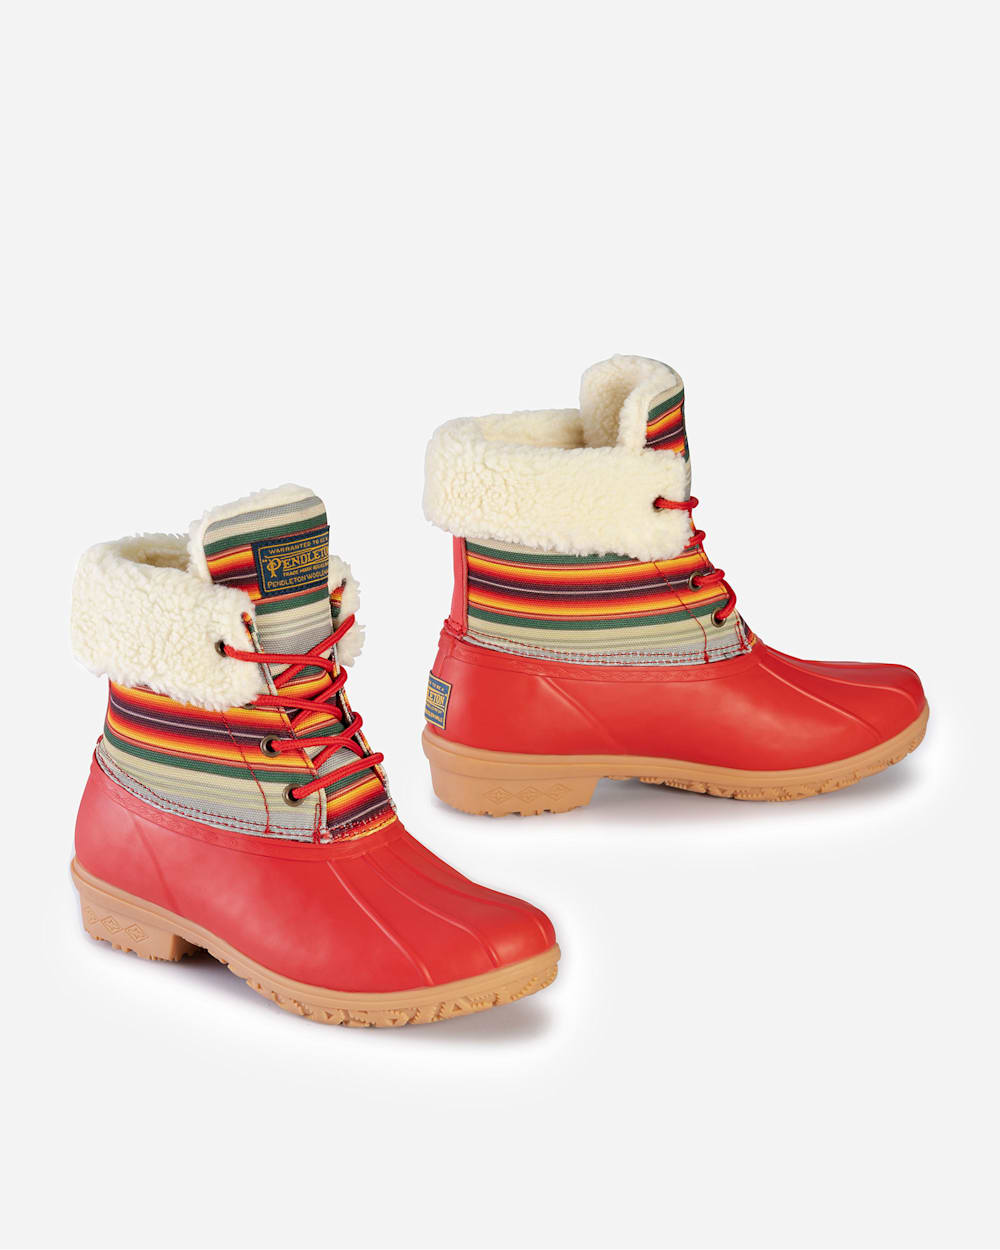 ALTERNATE VIEW OF WOMEN'S SERAPE ROLL TOP DUCK BOOTS IN RED image number 2